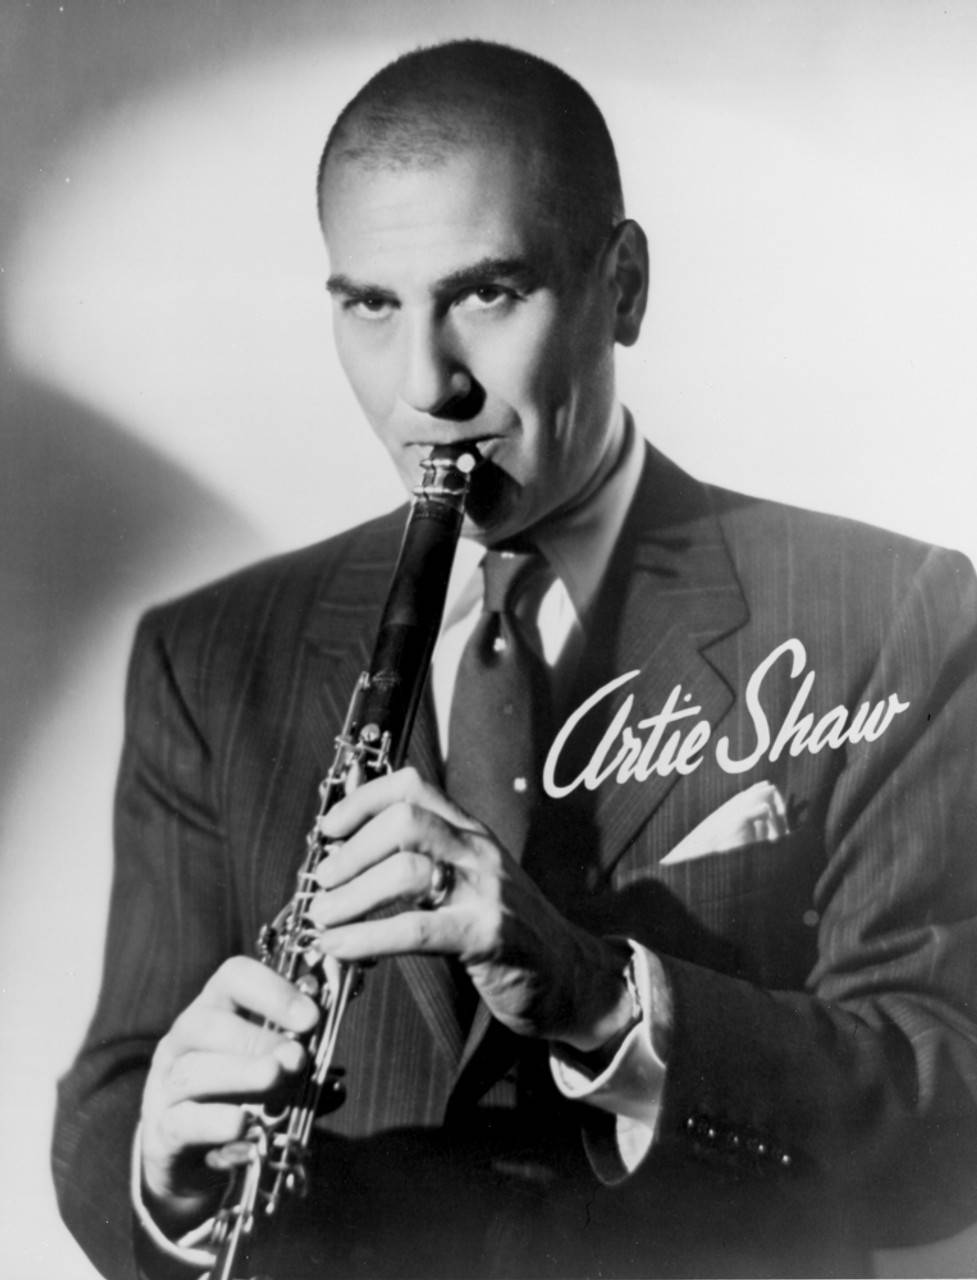 Bald Artie Shaw Playing Clarinet In Greyscale Wallpaper